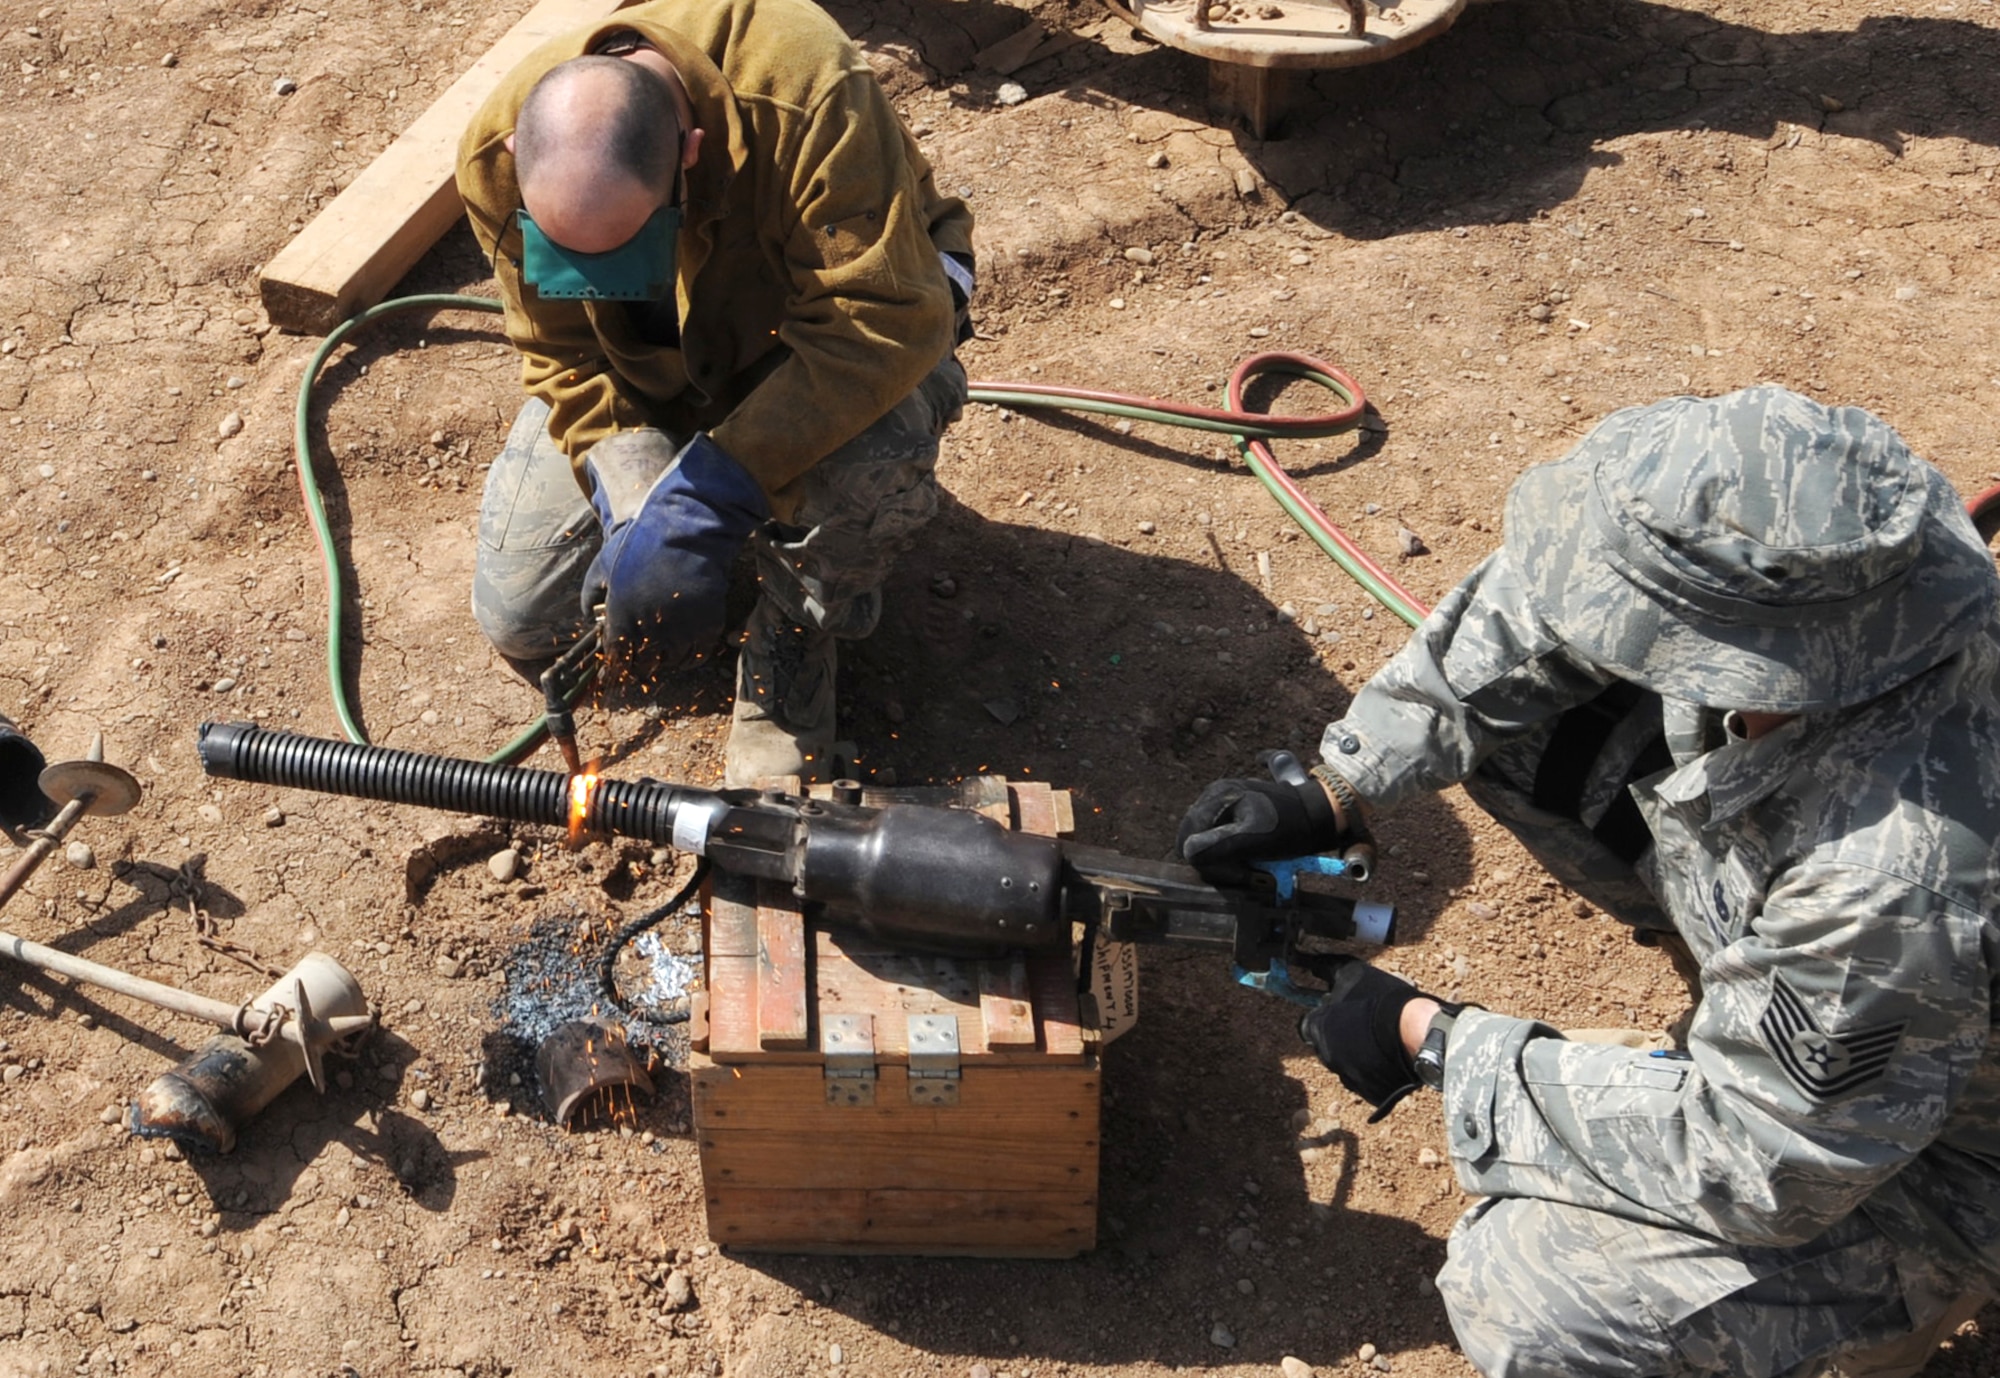 Tech. Sgt. Gregg Fleming holds a weapon steady as Tech. Sgt. Roy Hurd uses an oxy-acetylene torch to cut it at Joint Base Balad, Iraq, March 18. Enemy weapons were turned in by units and are being destroyed so they cannot be used against coalition forces and Iraqis. Sergeant Hurd is a 332nd Expeditionary Civil Engineer Squadron structural journeyman. Sergeant Fleming is the 332nd Expeditionary Security Forces Squadron assistant NCO in charge of combat arms training, maintenance and armory. (U.S. Air Force photo/Senior Airman Elizabeth Rissmiller)